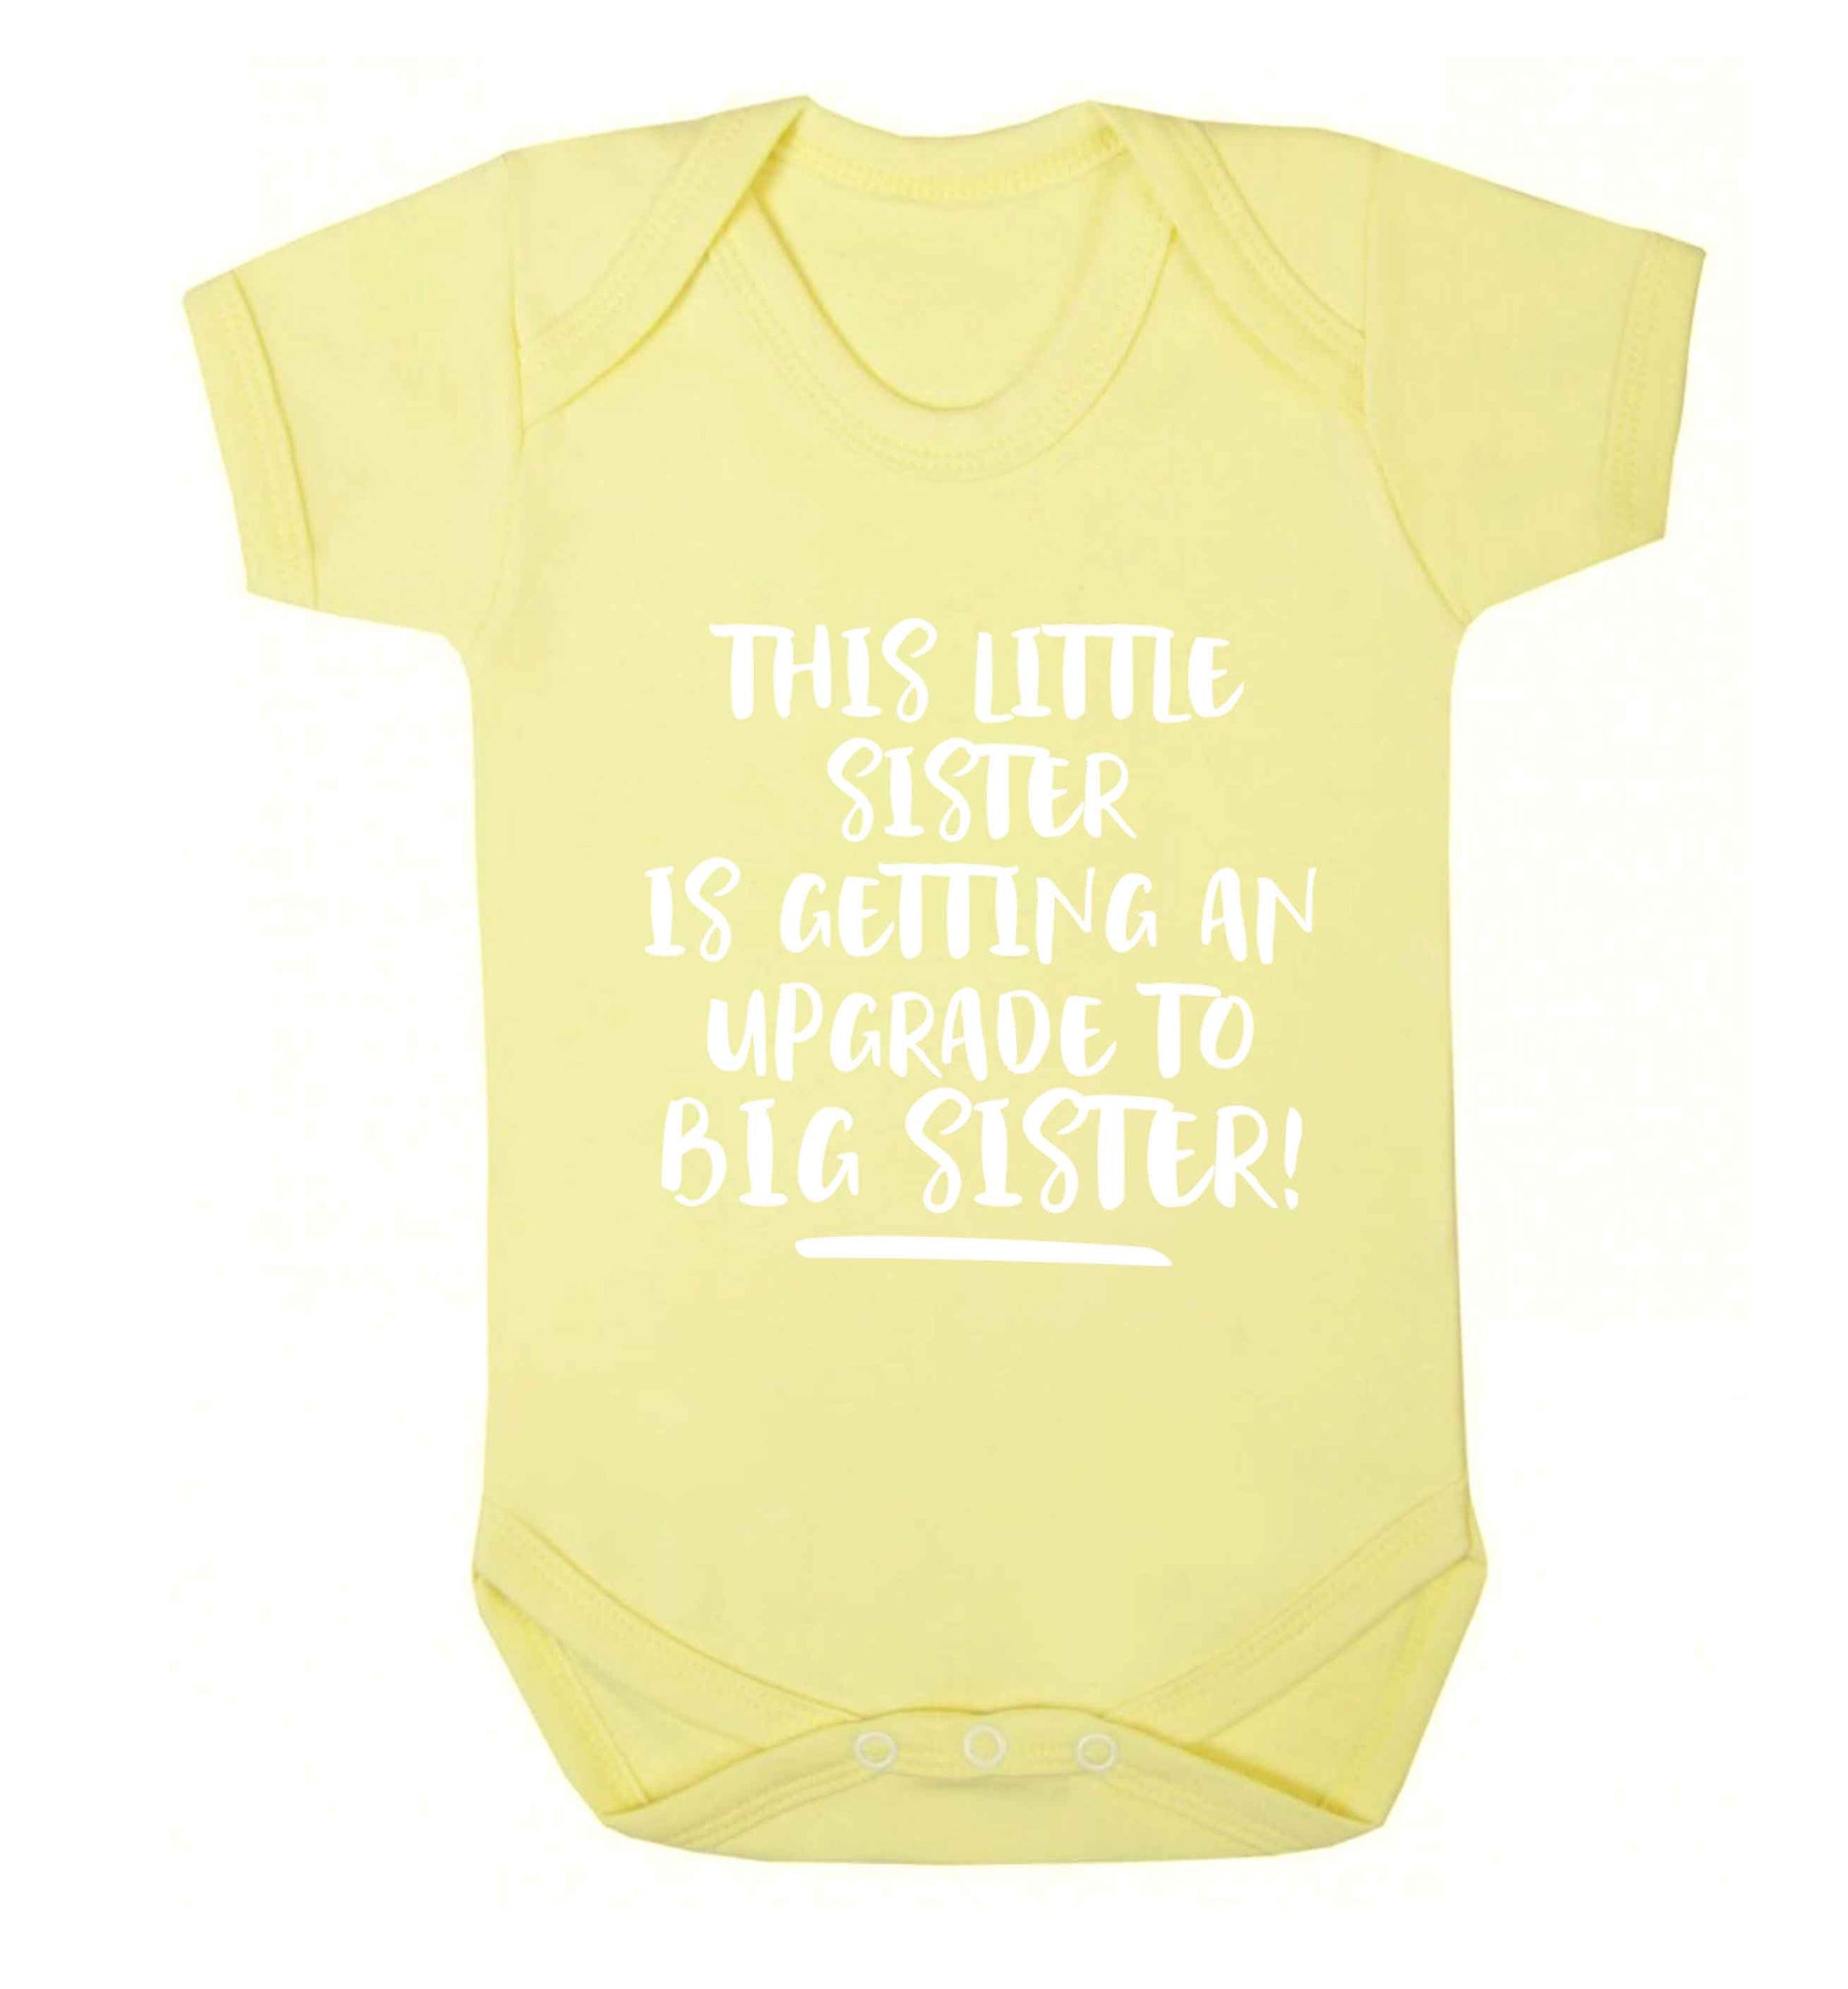 This little sister is getting an upgrade to big sister! Baby Vest pale yellow 18-24 months